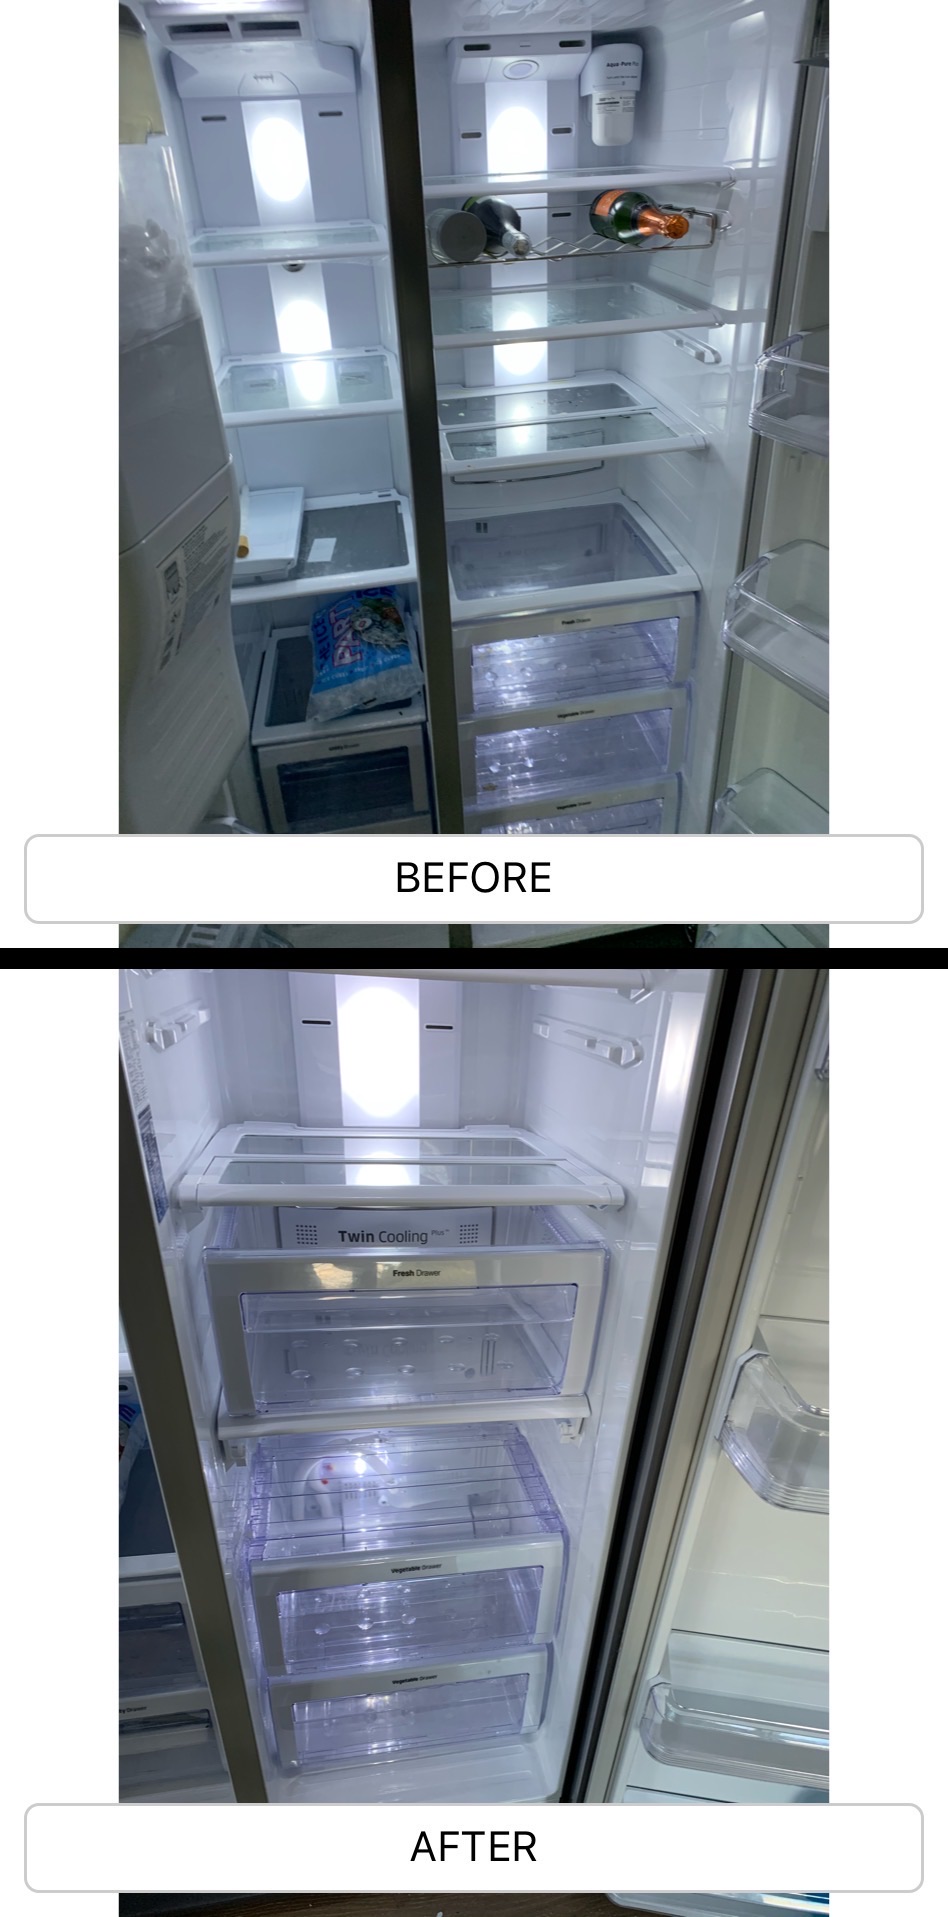 fridge freezer before and after move in cleaning service in wimbledon